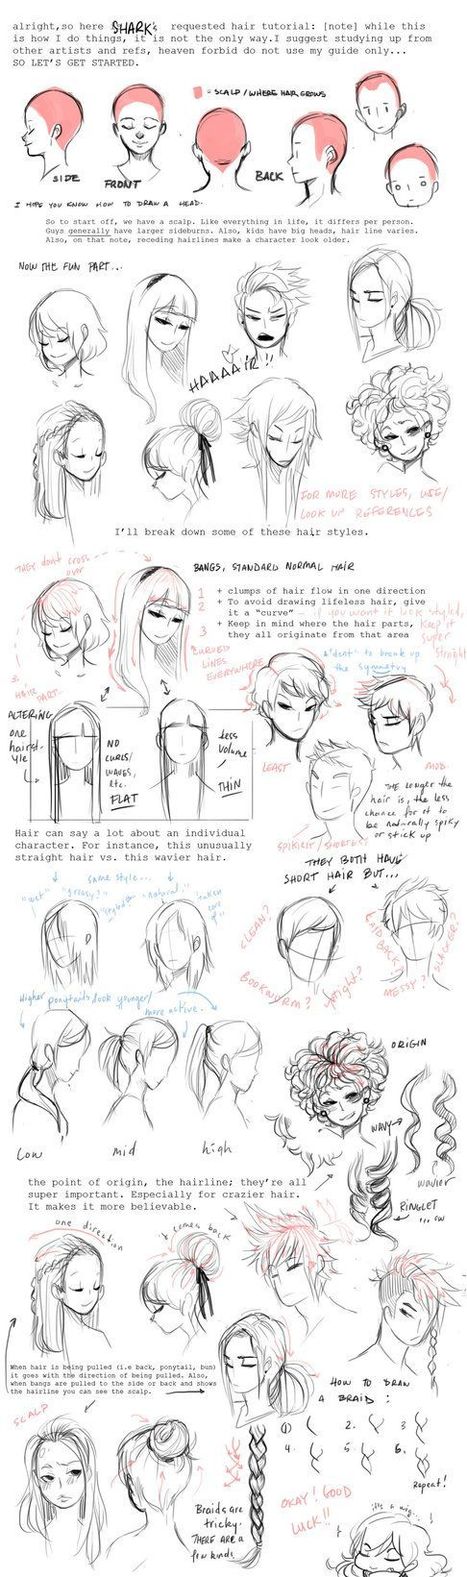 Hair Drawing Reference Guide | Drawing References and Resources | Scoop.it